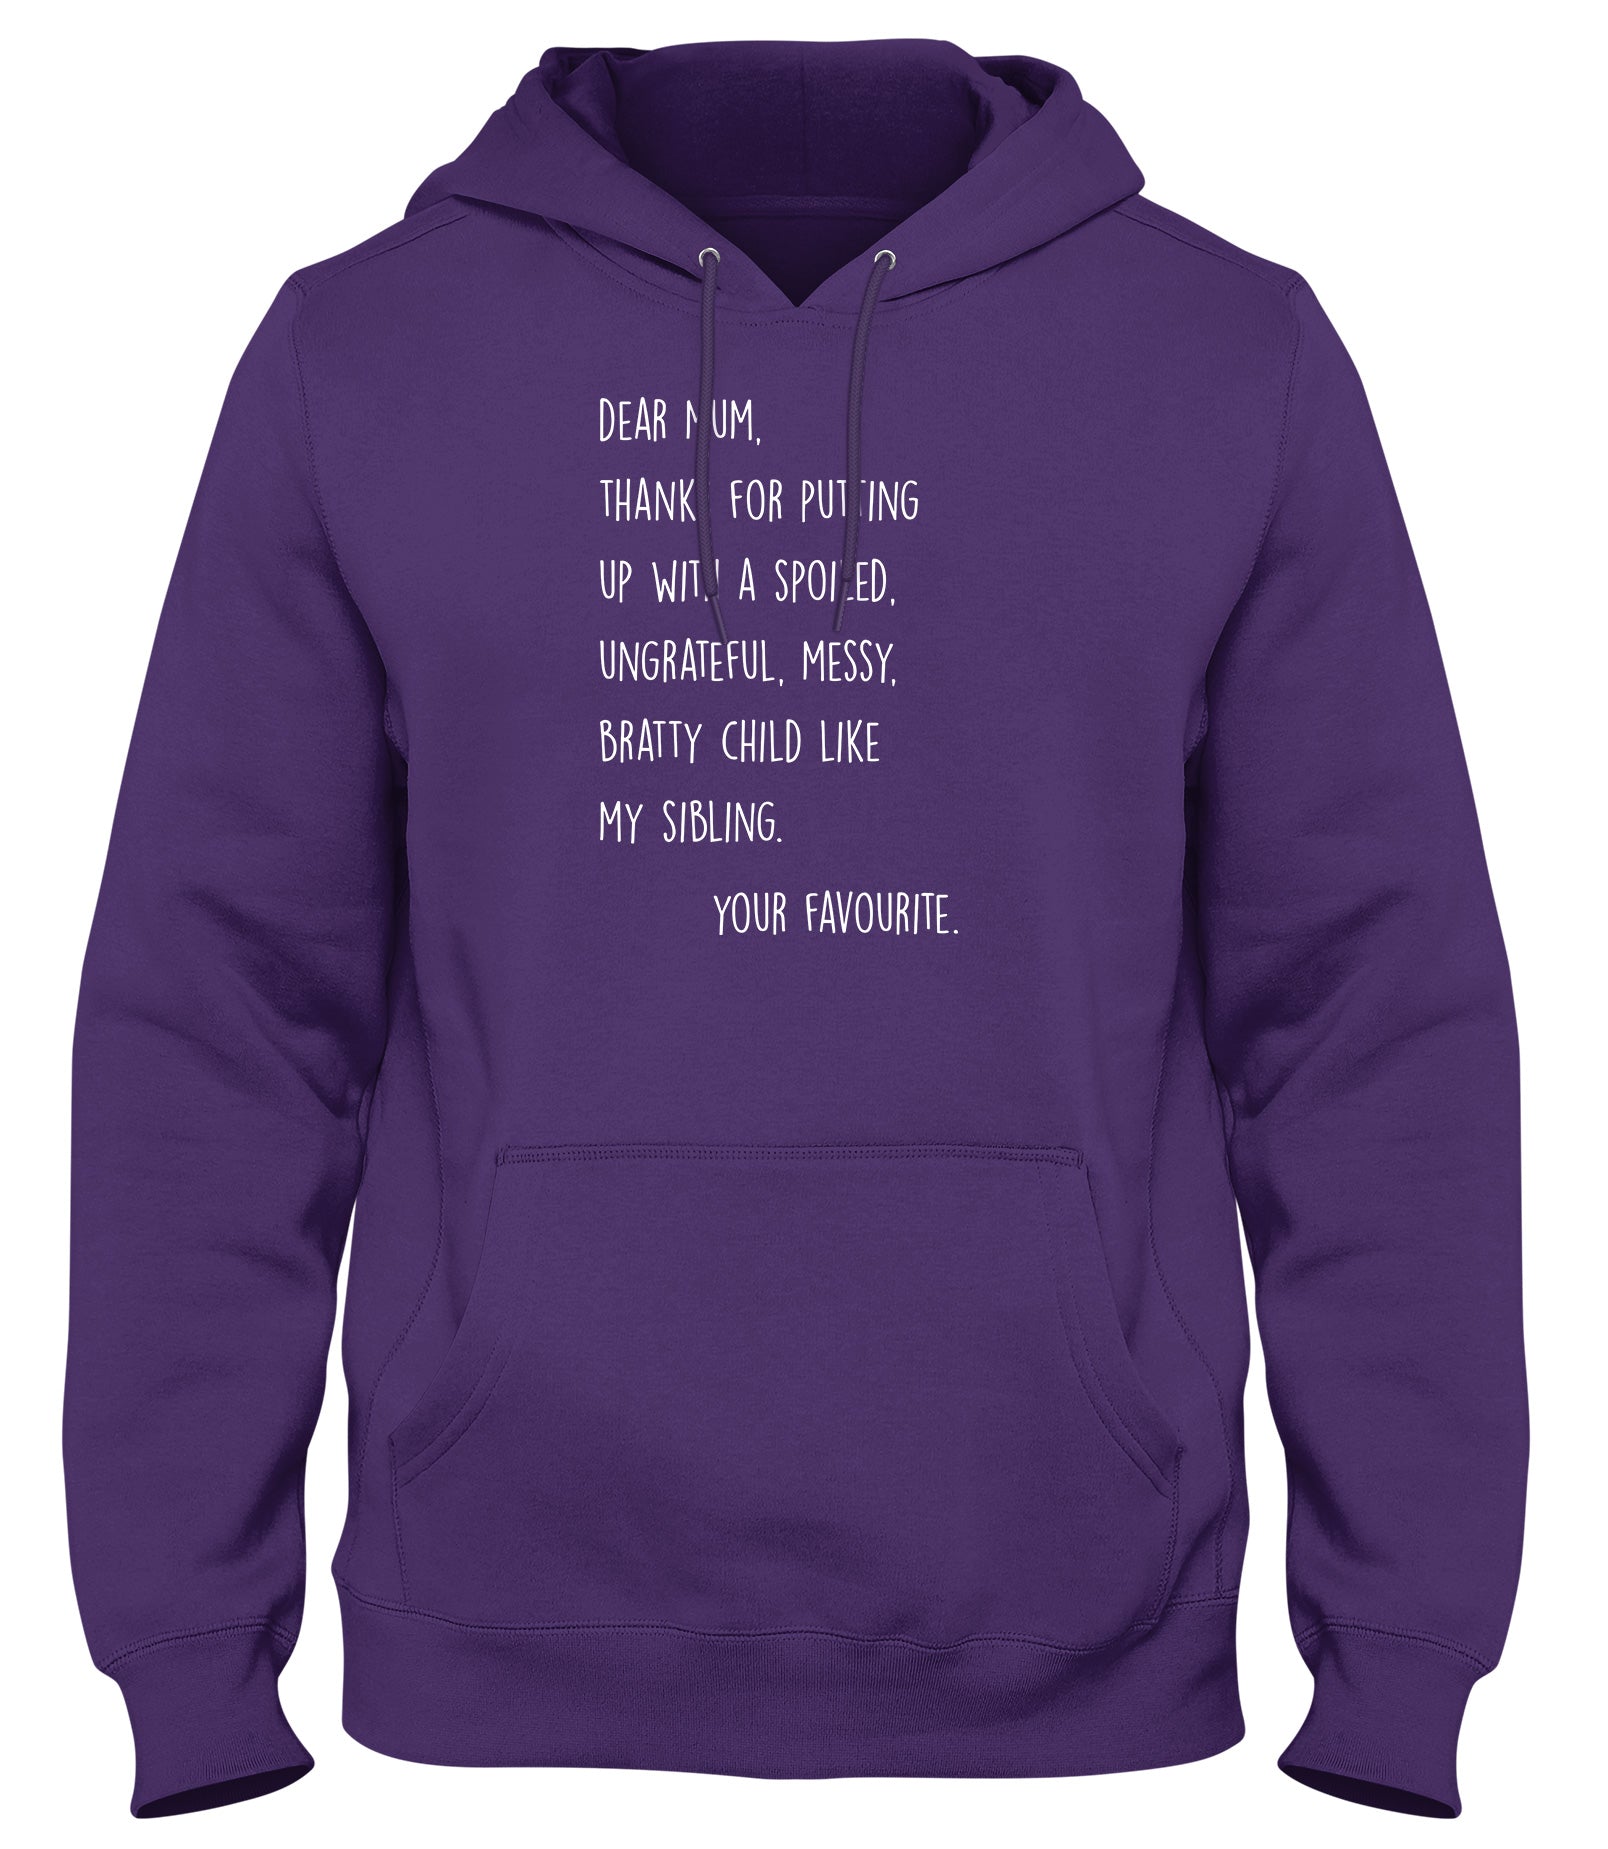 DEAR MUM  THANKS FOR PUTTING UP WITH A SPOILED BRATTY CHILD MENS LADIES WOMENS UNISEX HOODIE